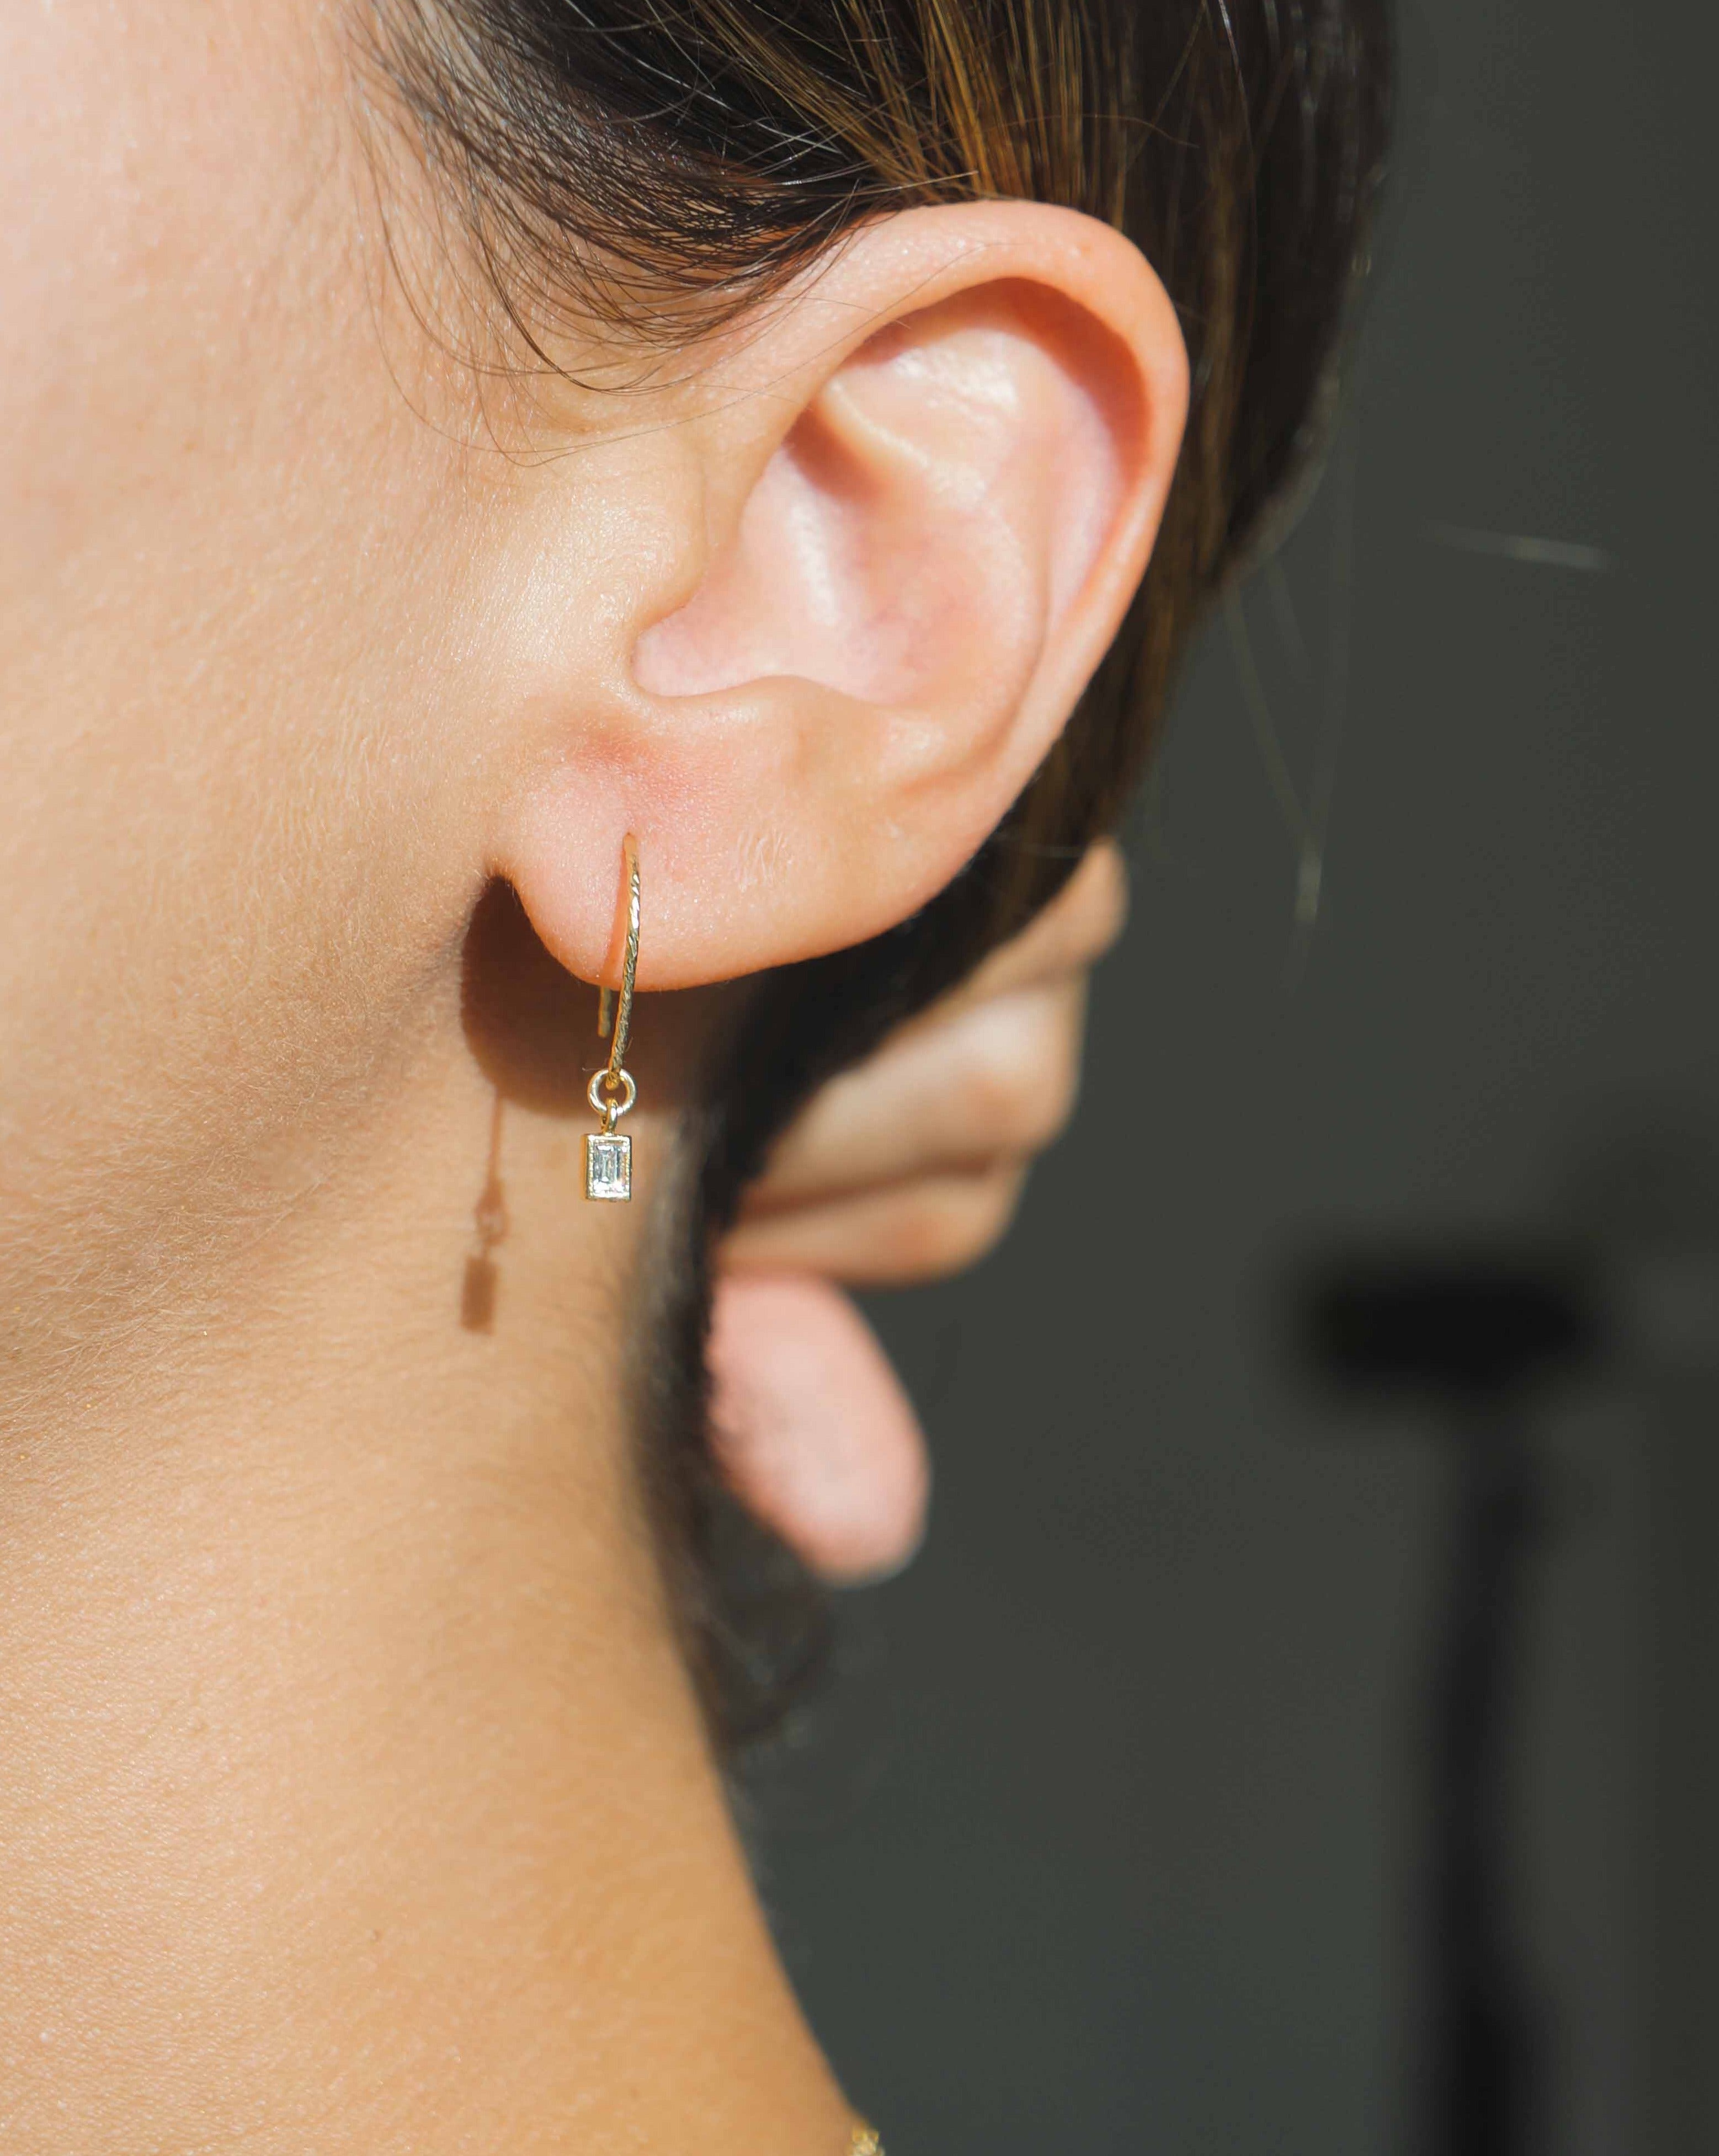 You Cadre Earrings by KOZAKH. Diamond textured hook earrings, crafted in 14K Gold Filled, featuring a CUbic Zirconia charm.